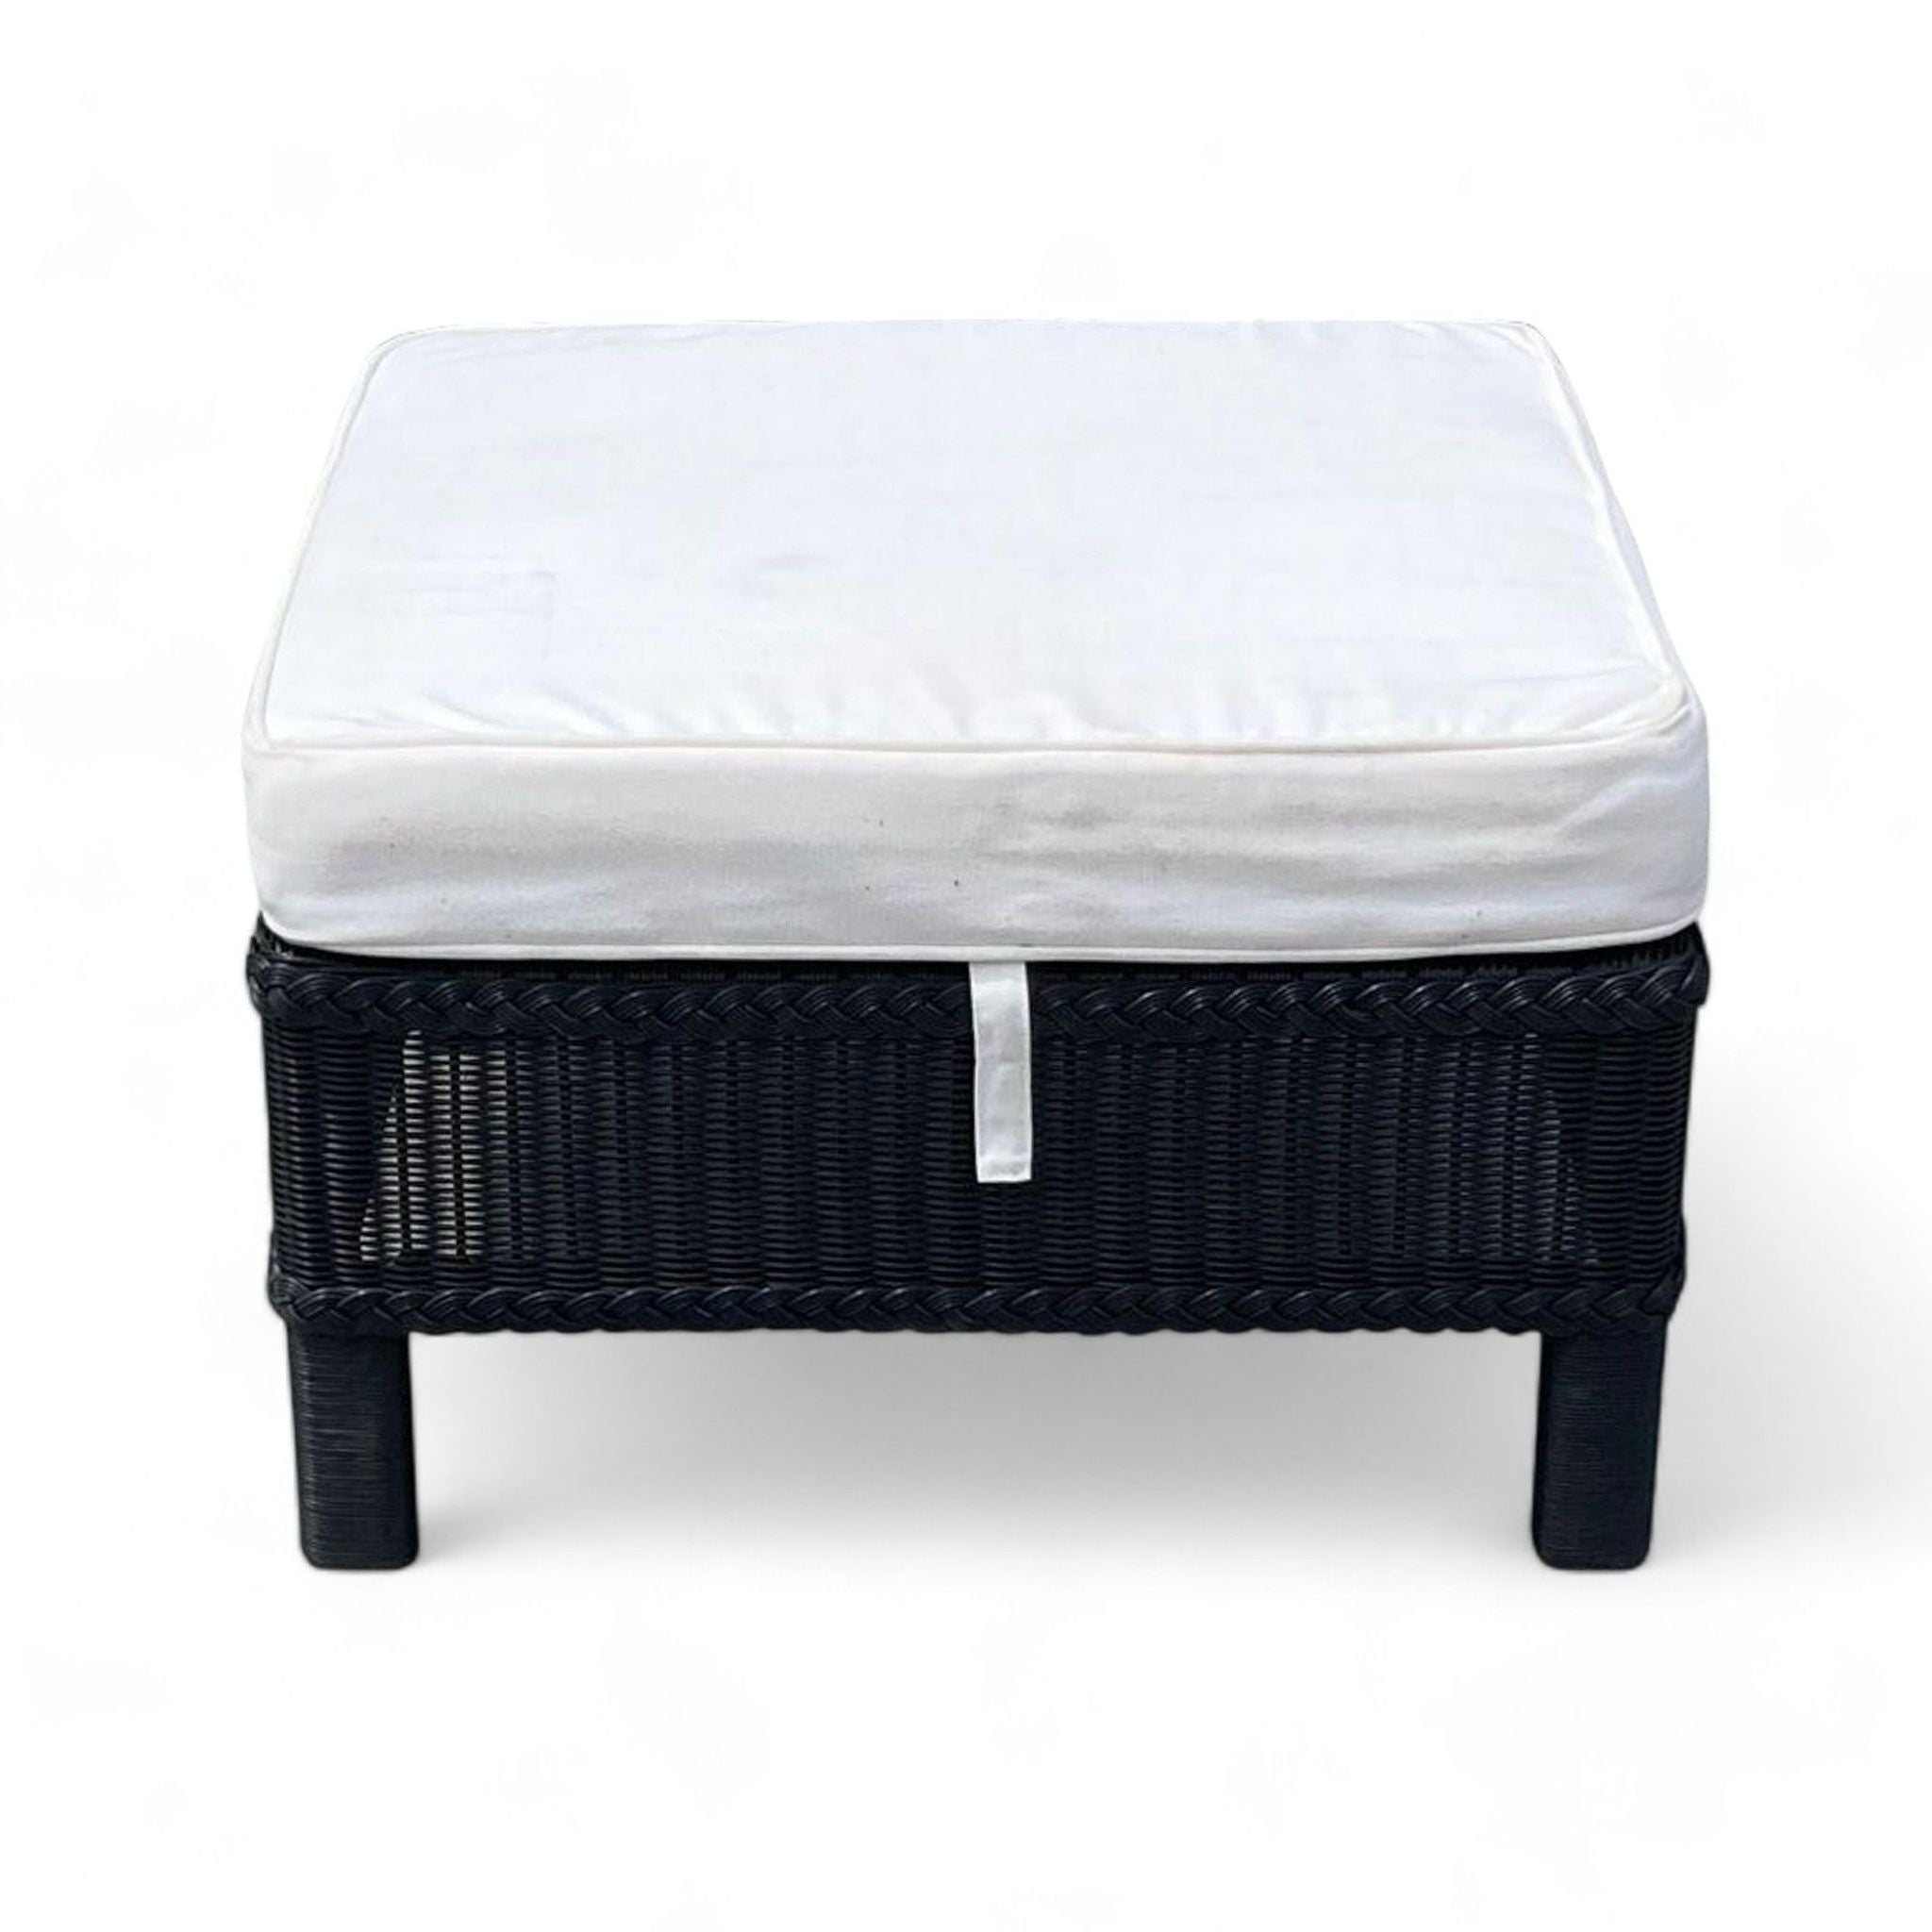 Square ottoman by Reperch with a white cushion on top and a black woven wicker base. Category: Stools, Ottomans & Benches.